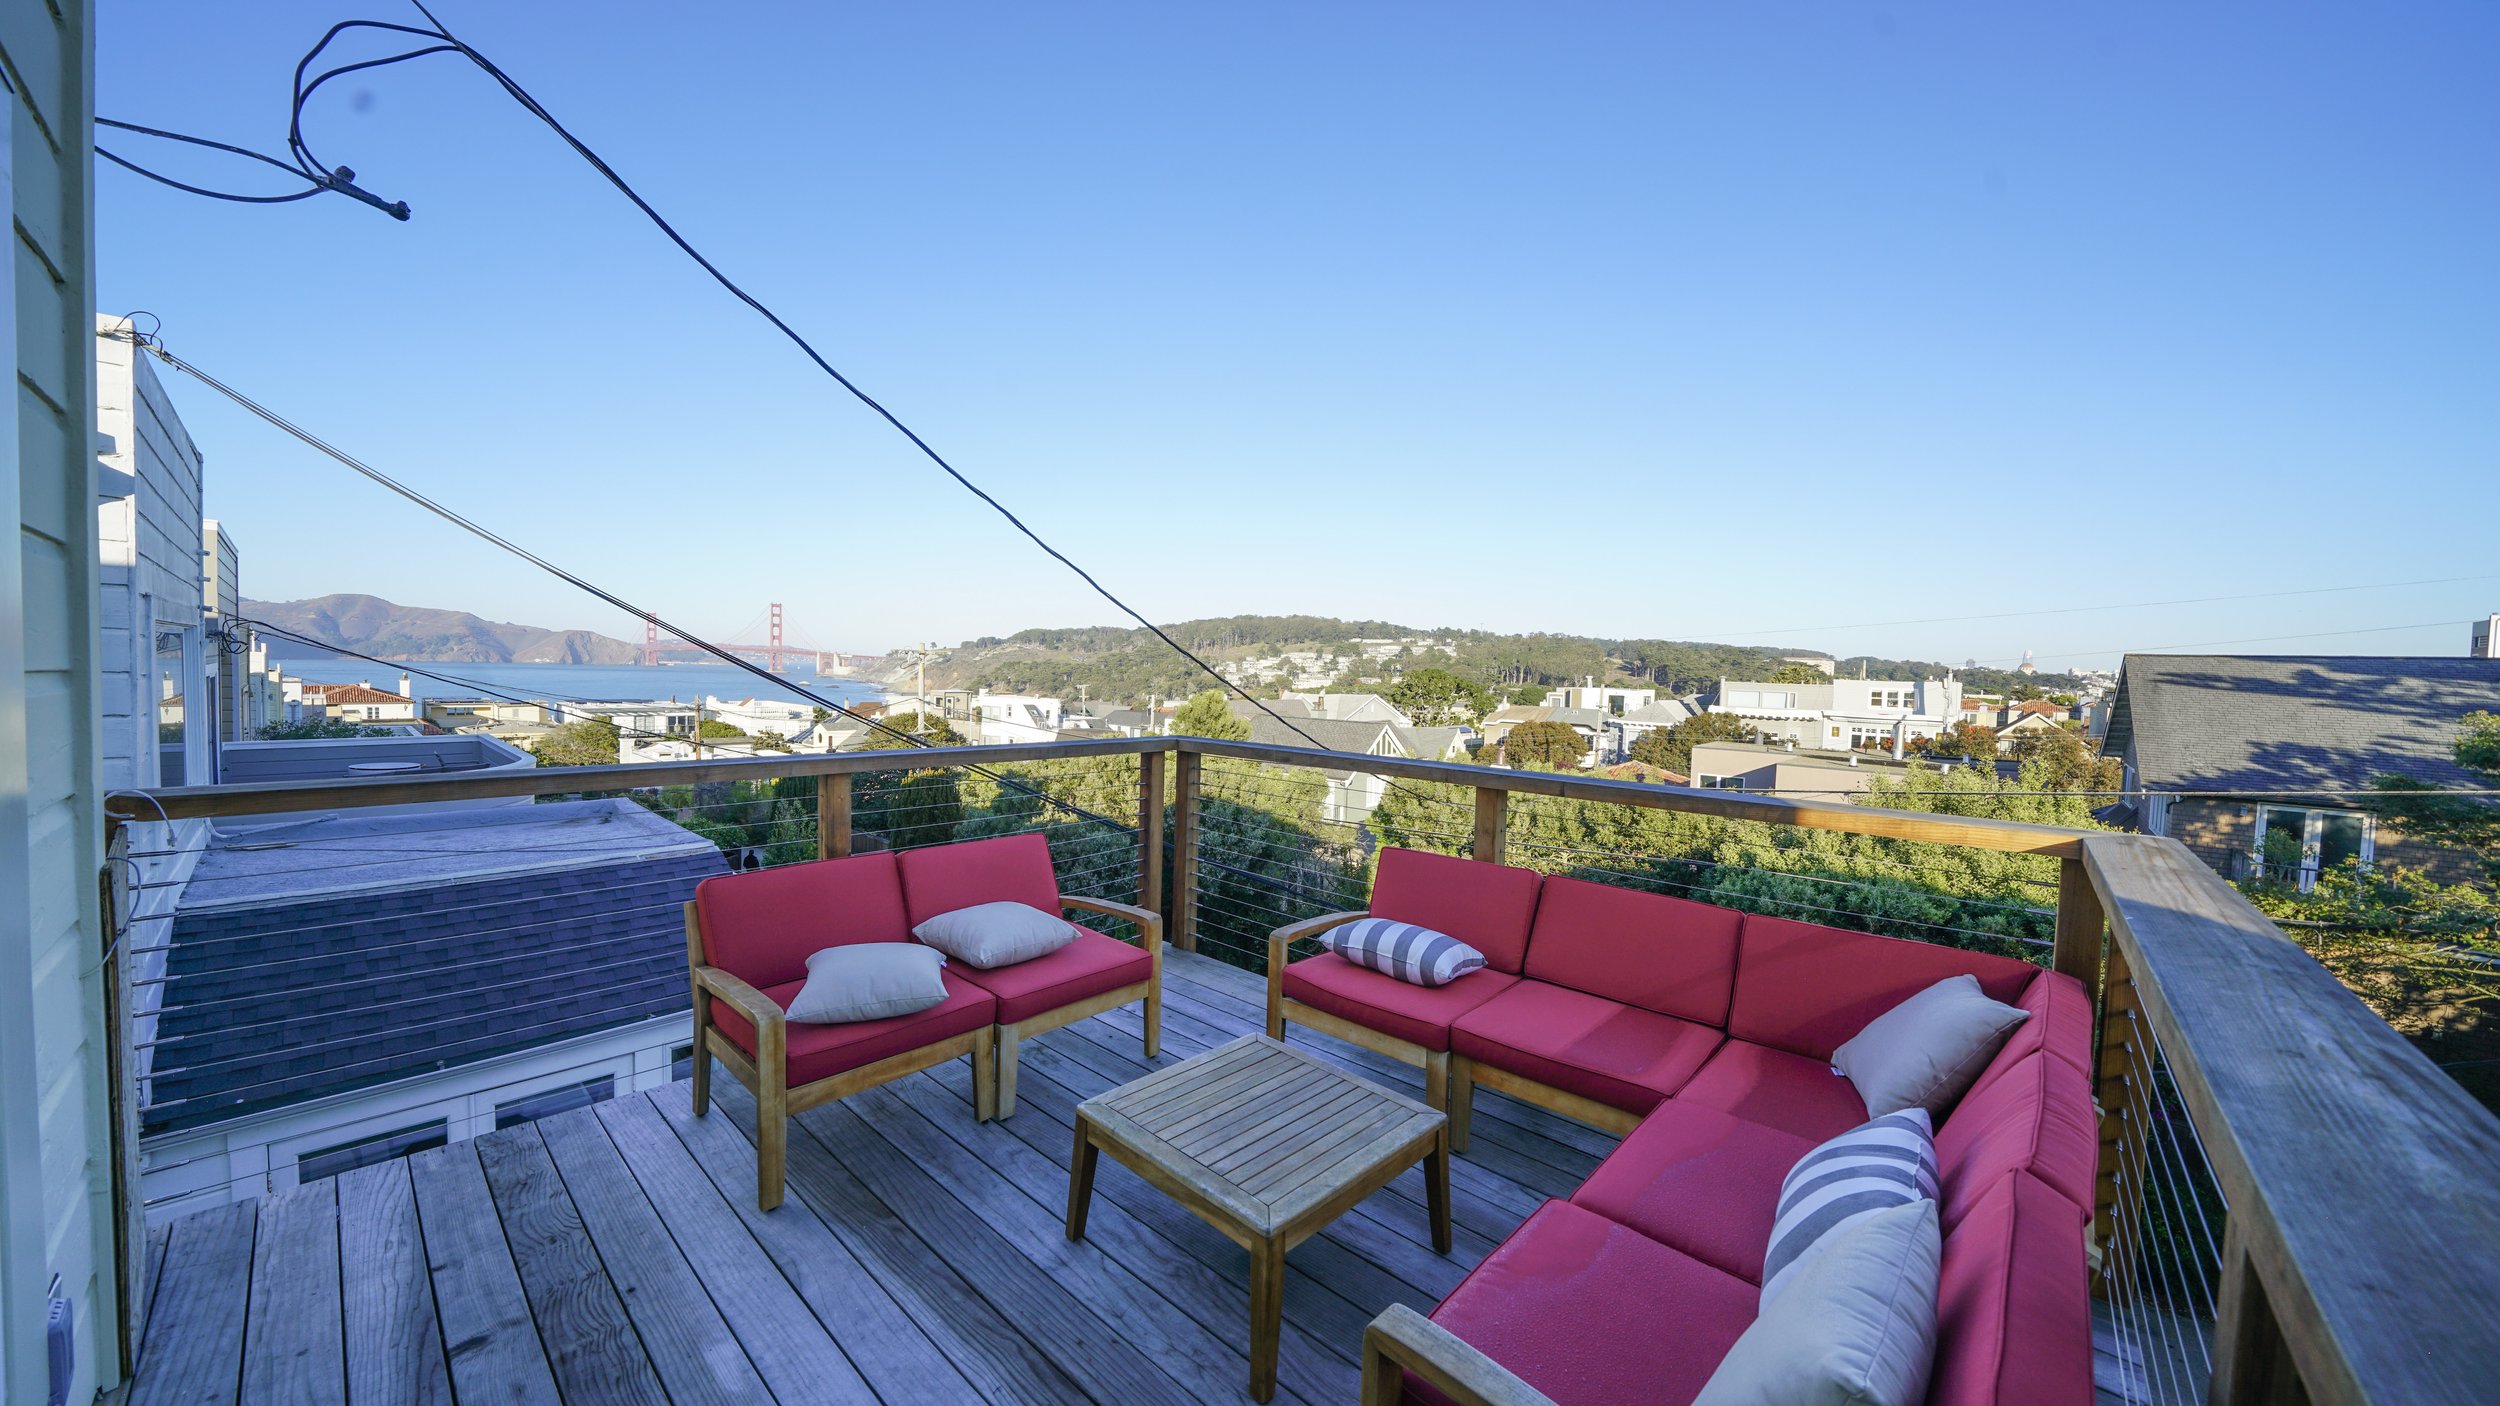 Sea Cliff outdoor deck seating Outerlands Design